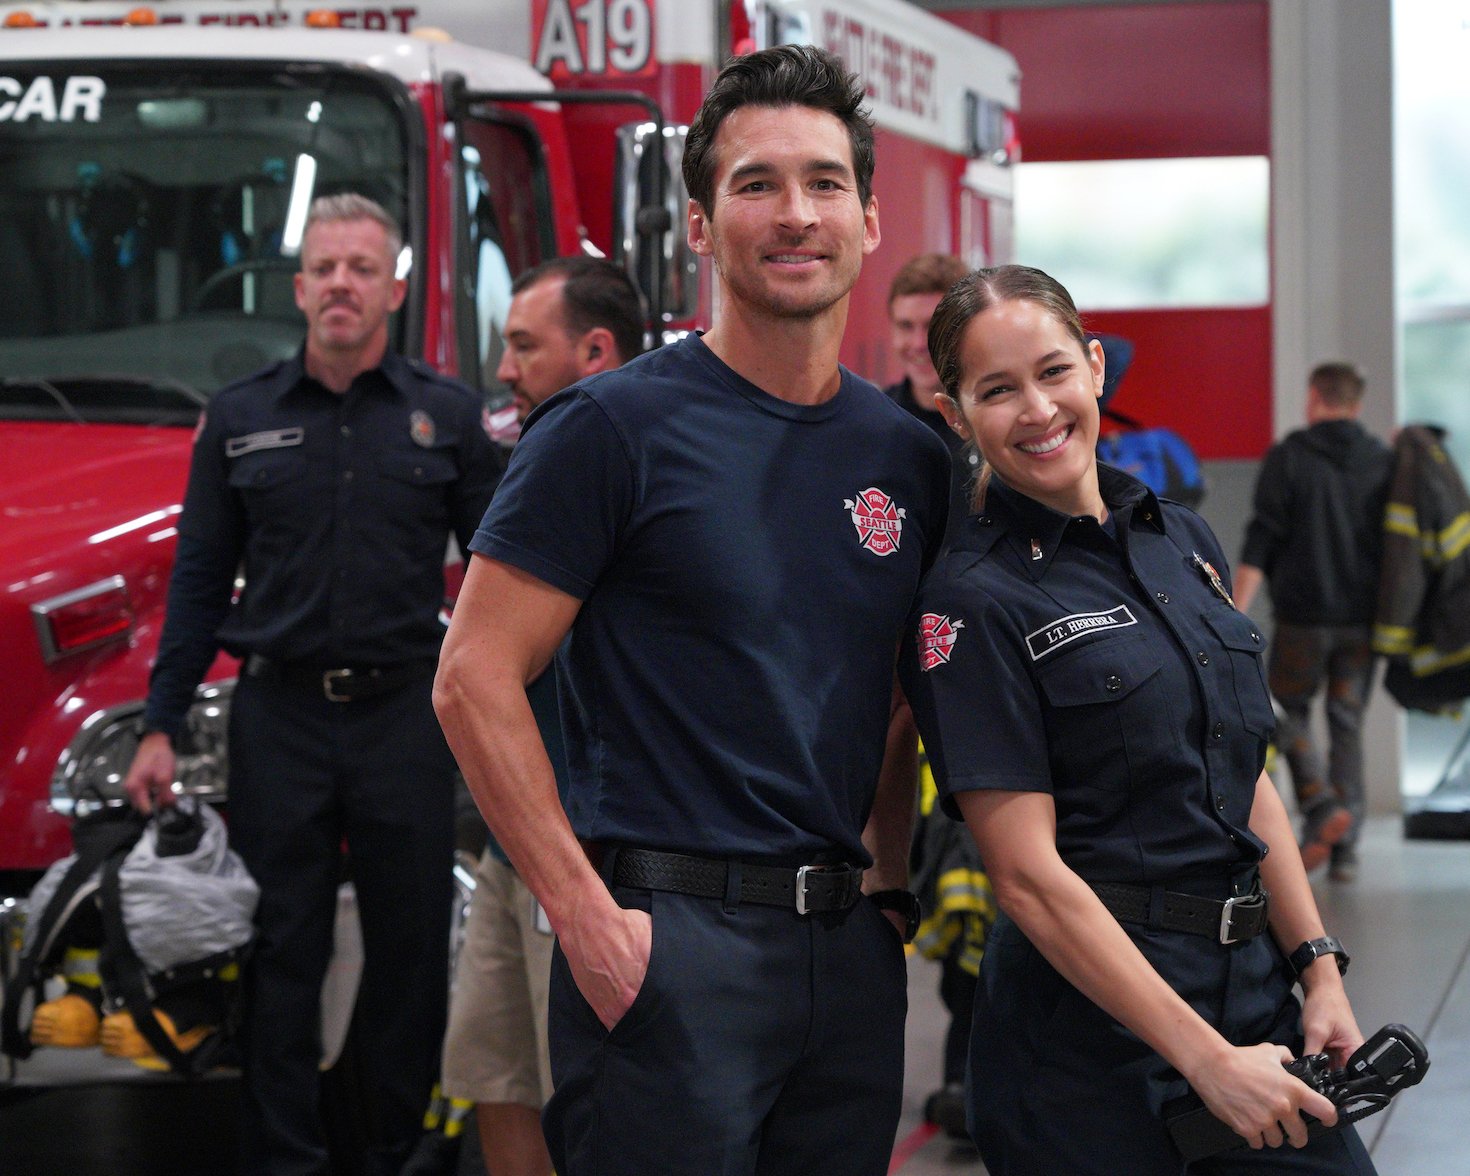 Members of the 'Station 19' cast smiling at the camera with other firefighters and a firetruck behind them. 'Station 19' Season 5 premiere features many of the same cast members